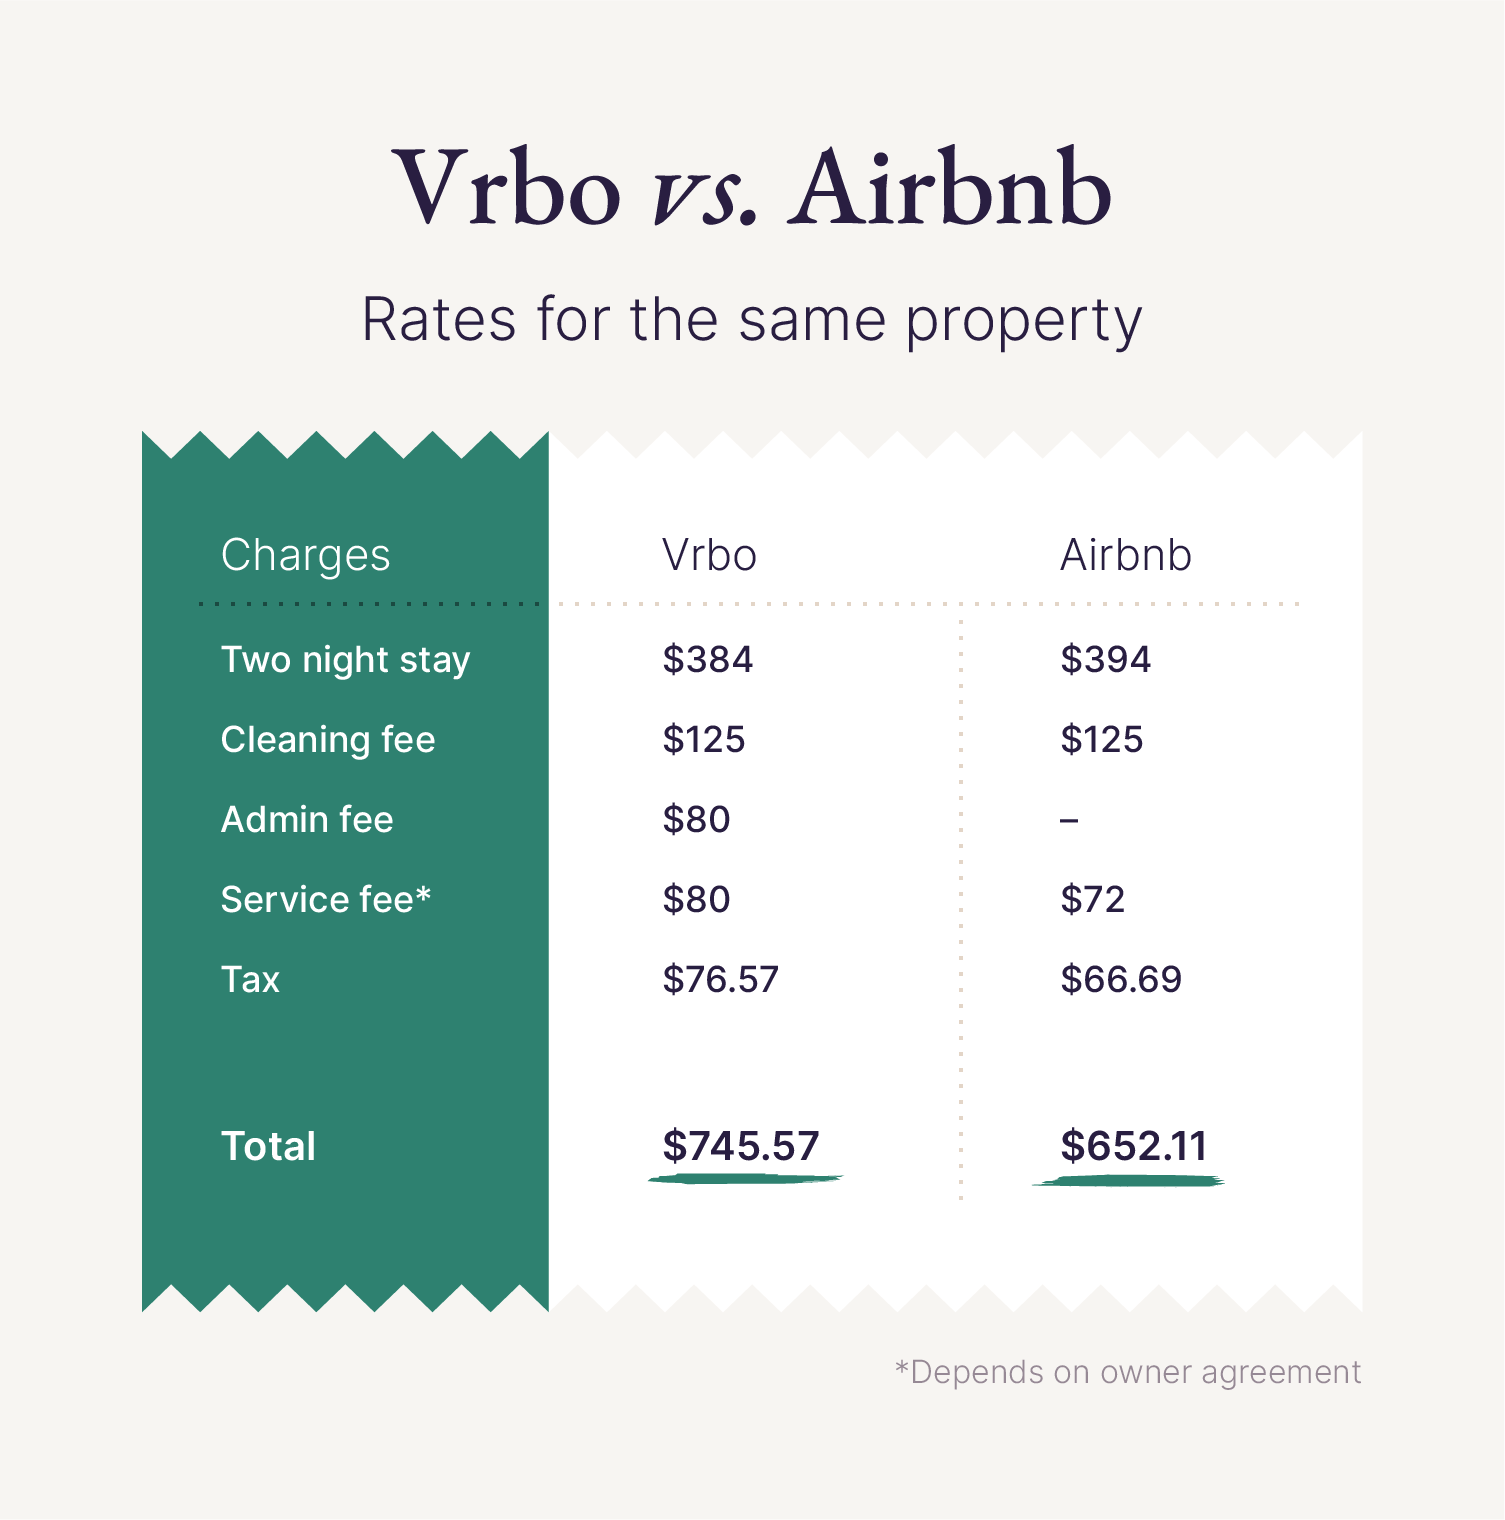 Airbnb vs Vrbo: What Really is the Difference?